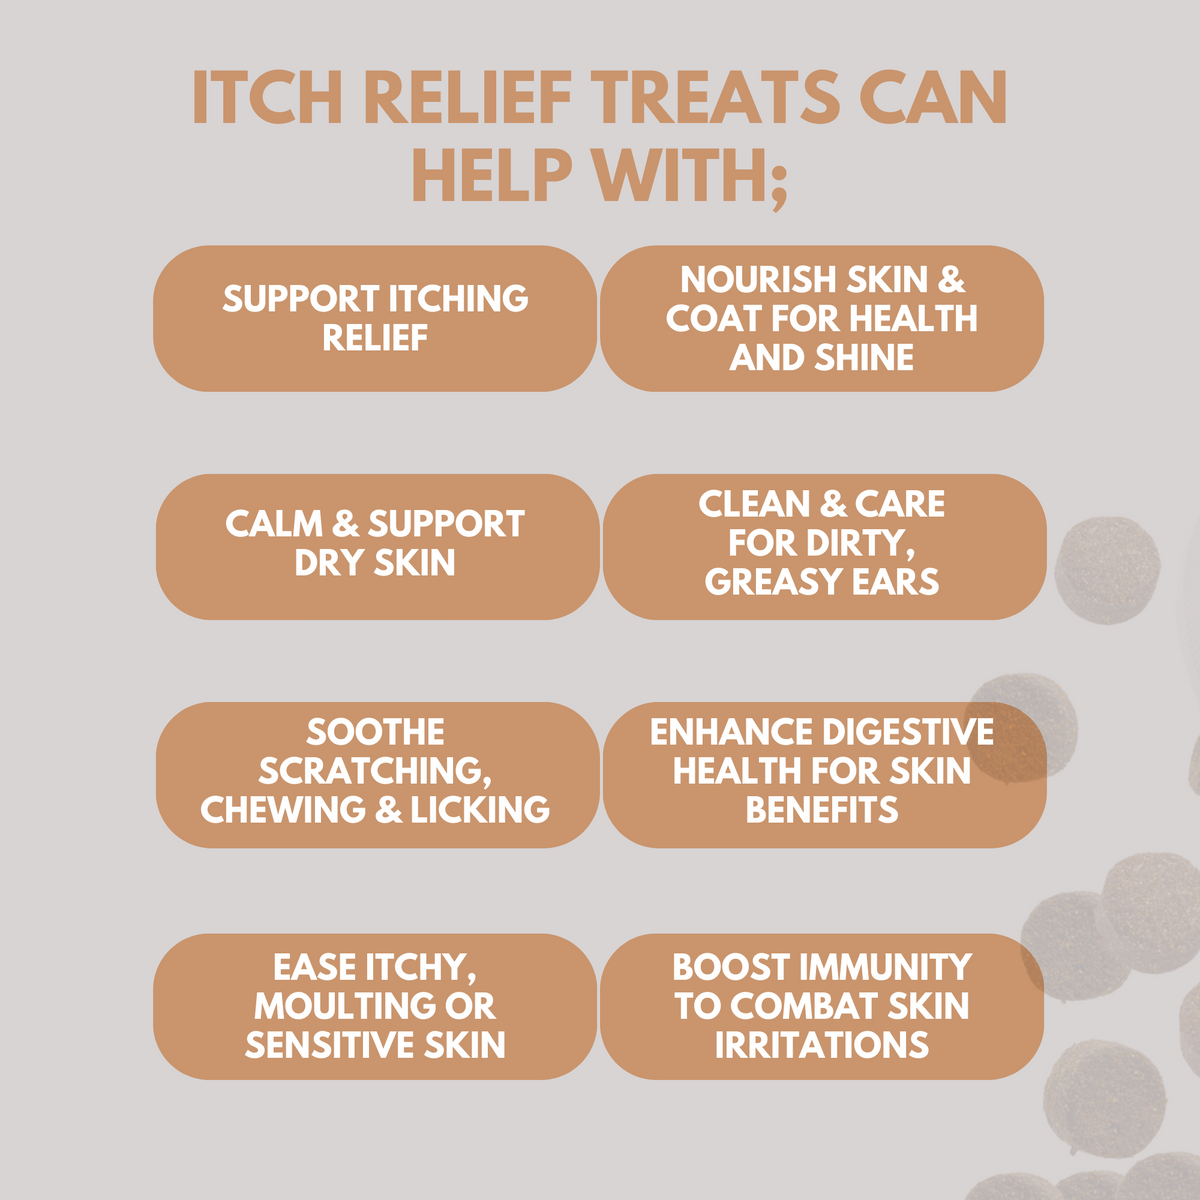 Itch Relief Treats